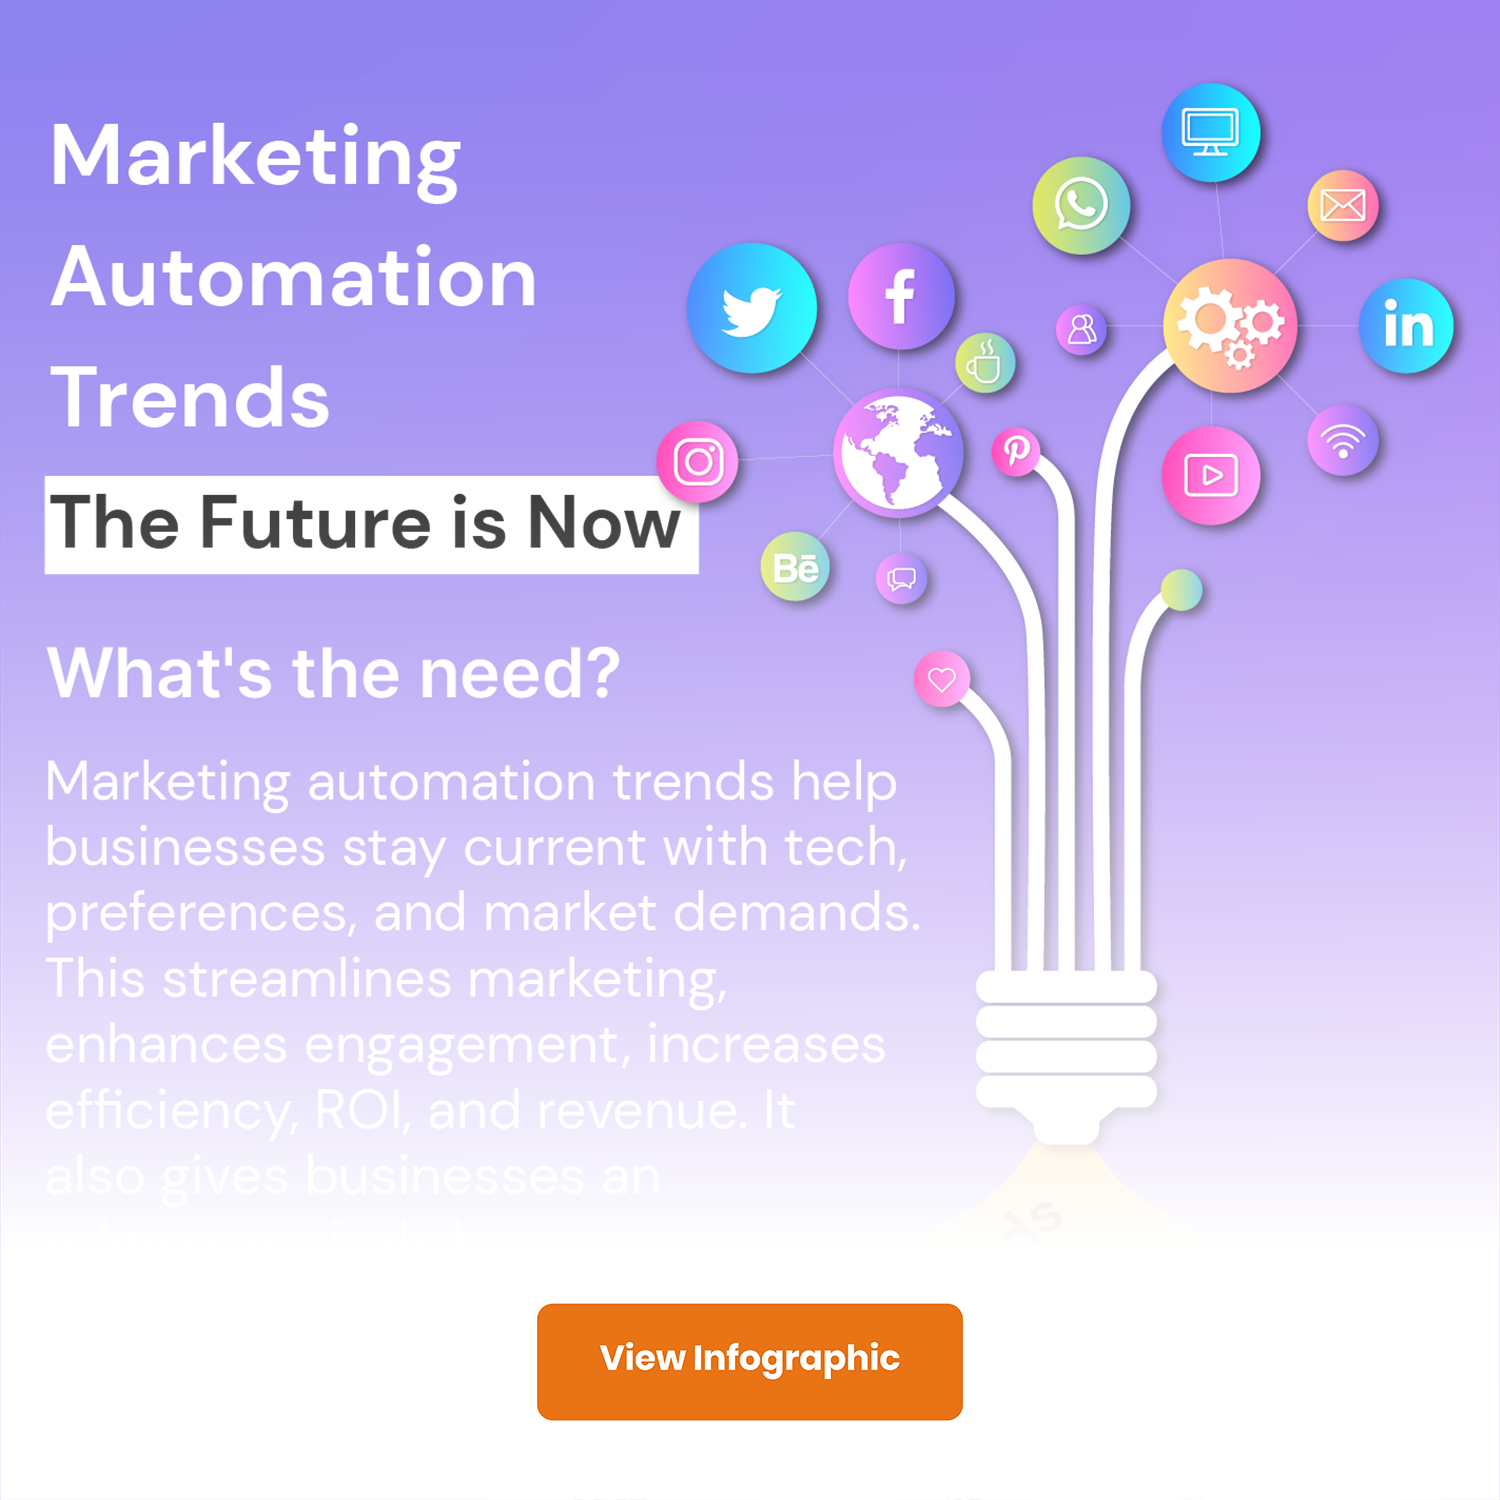 Marketing Automation Trends Infographic